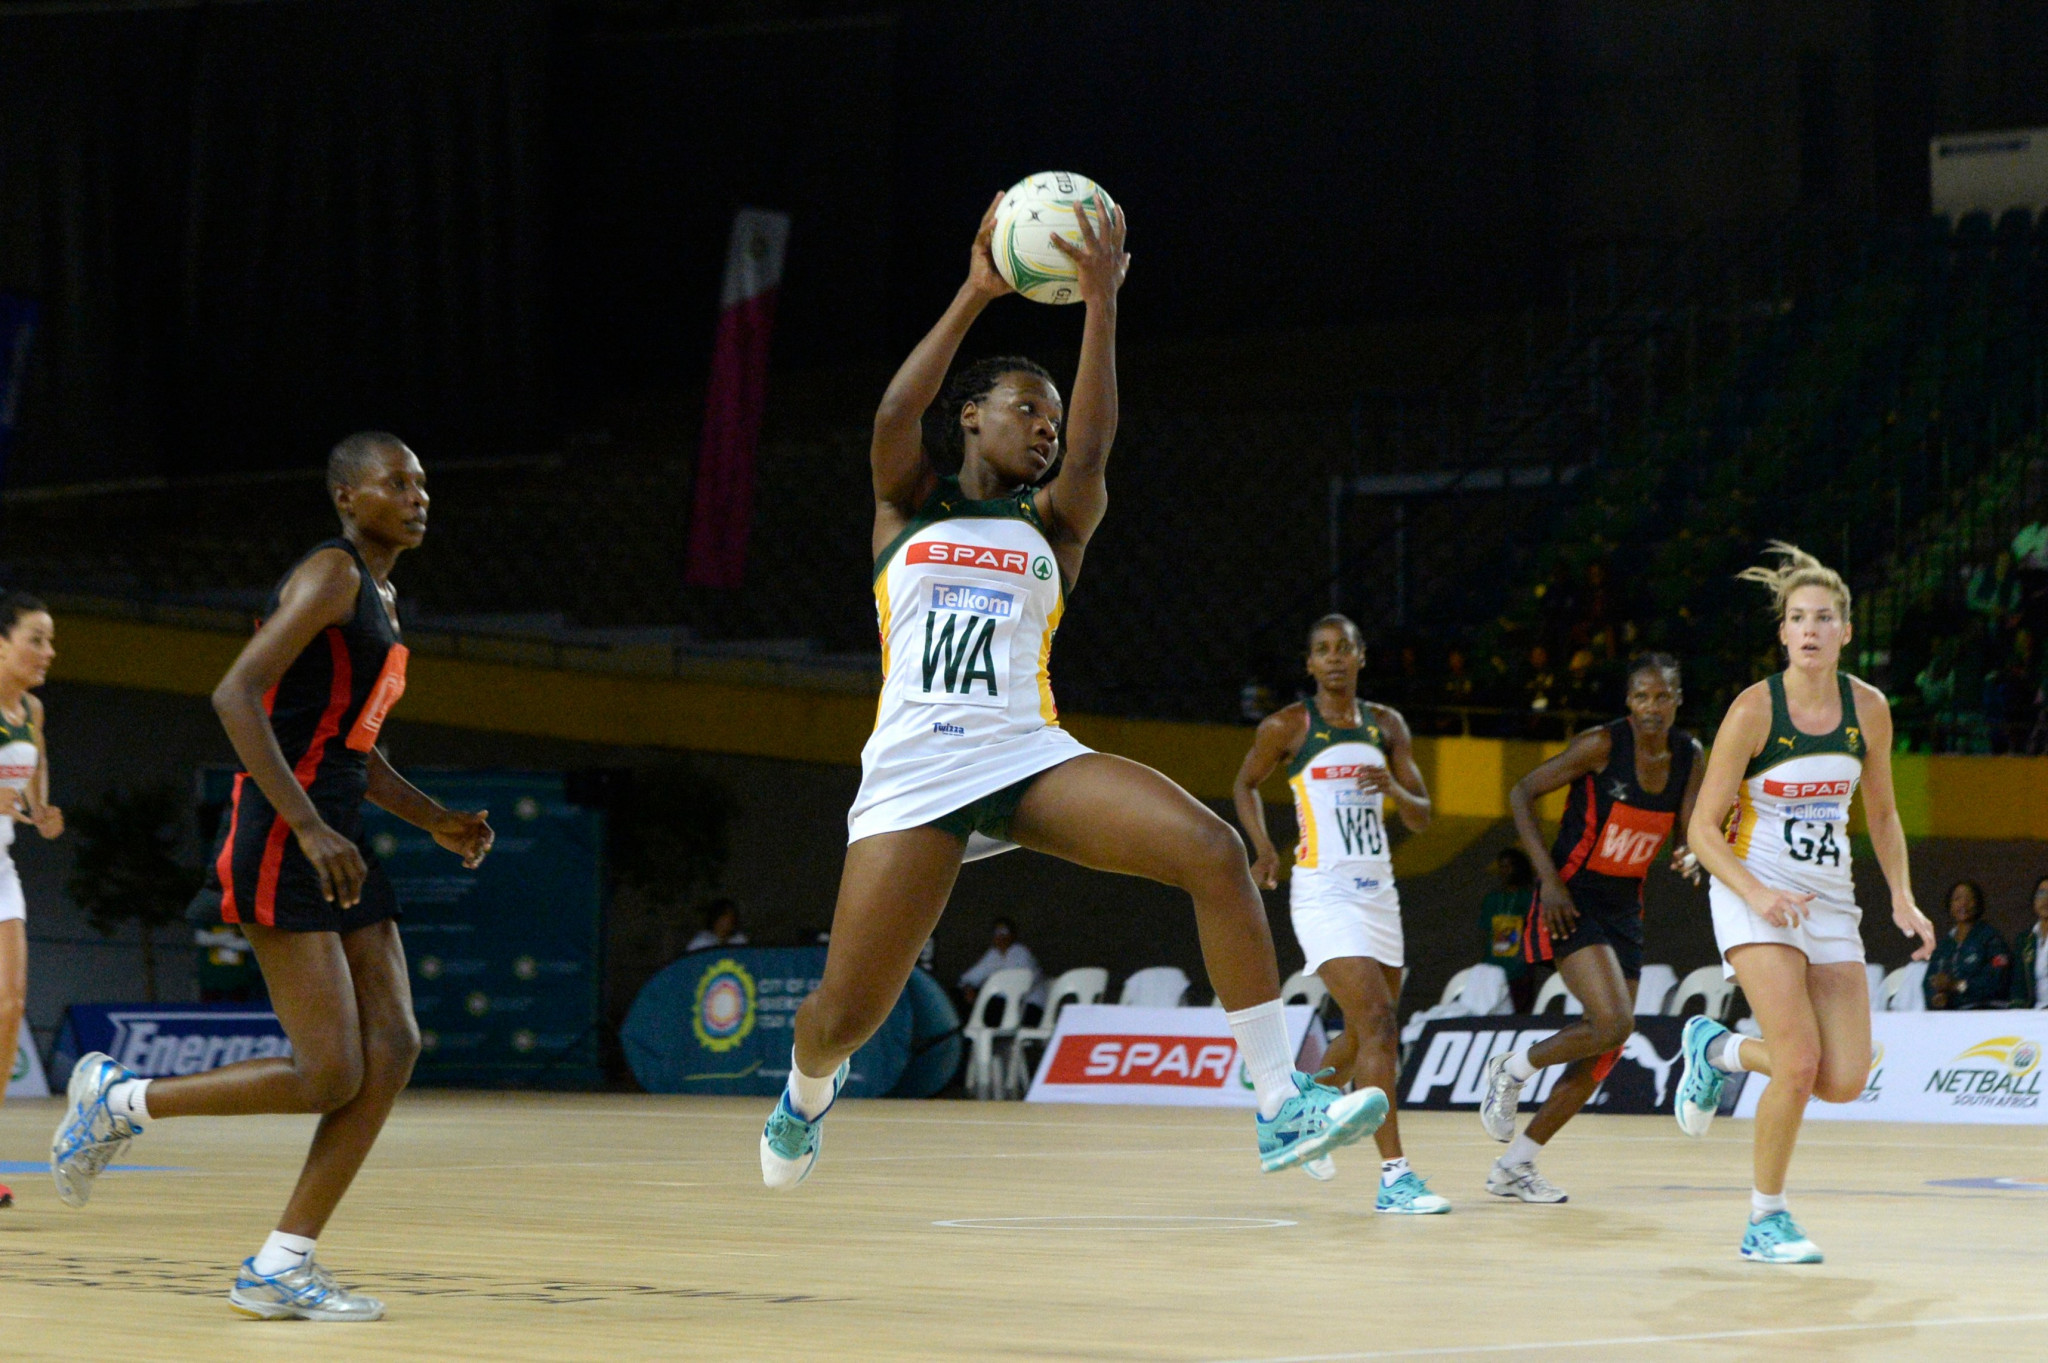 South Africa won all six of their matches to clinch the Africa Netball Cup in Cape Town ©Netball South Africa